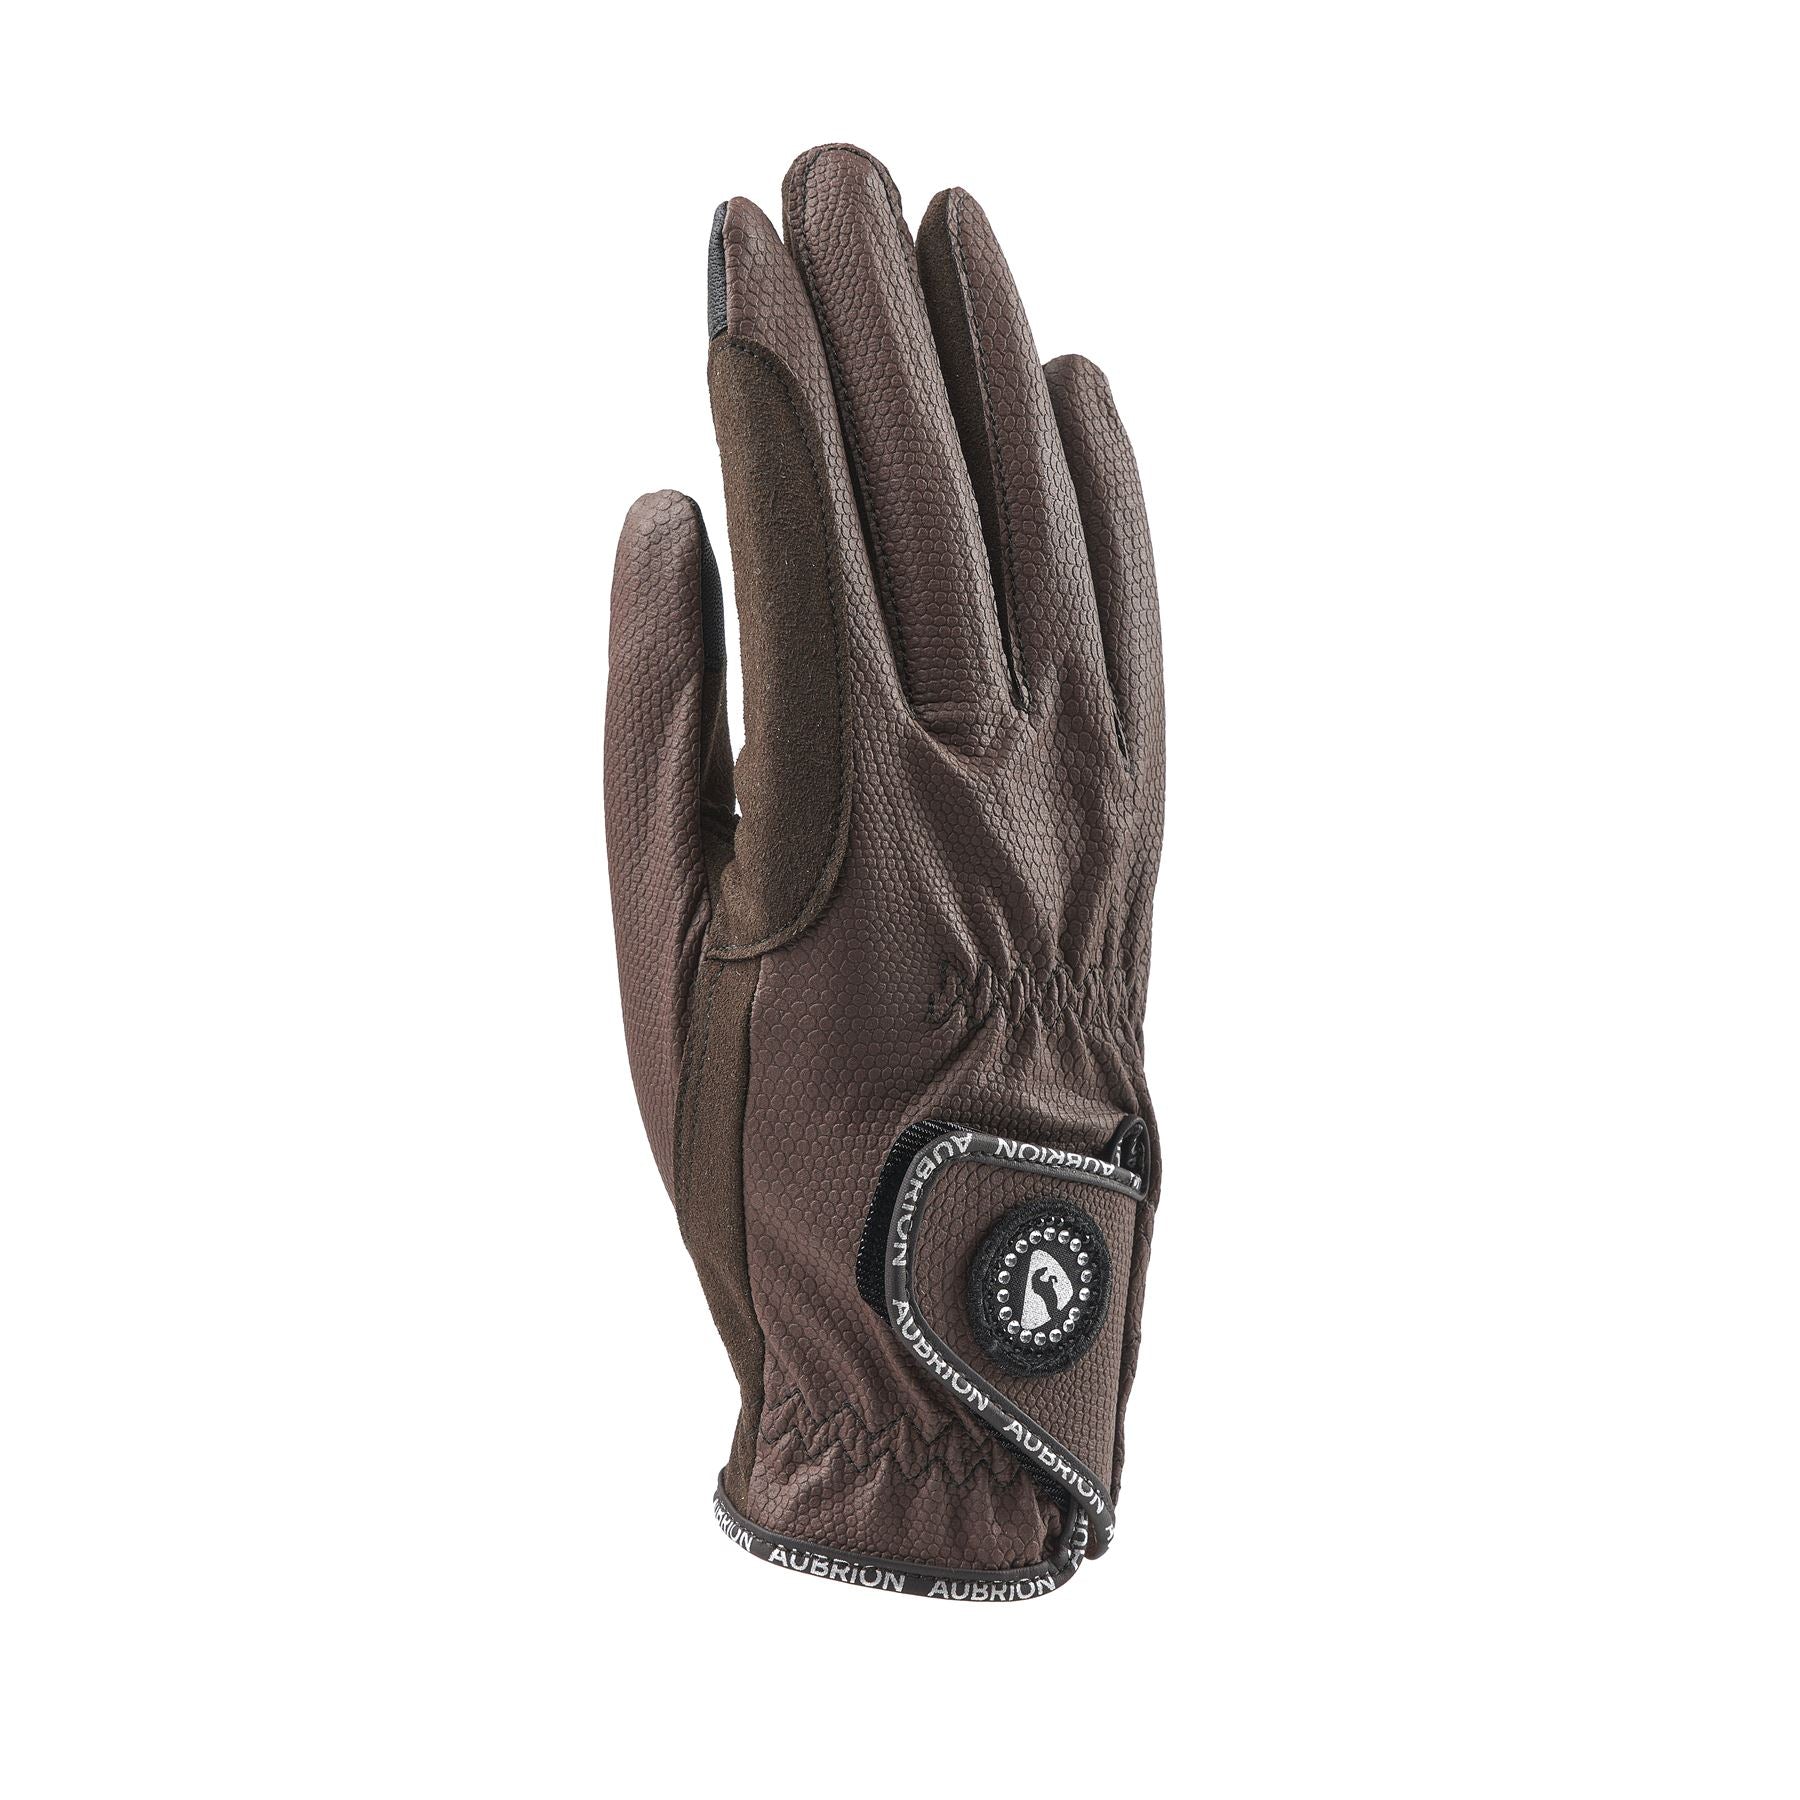 Shires Aubrion Aachen Riding Gloves - Childs - Just Horse Riders